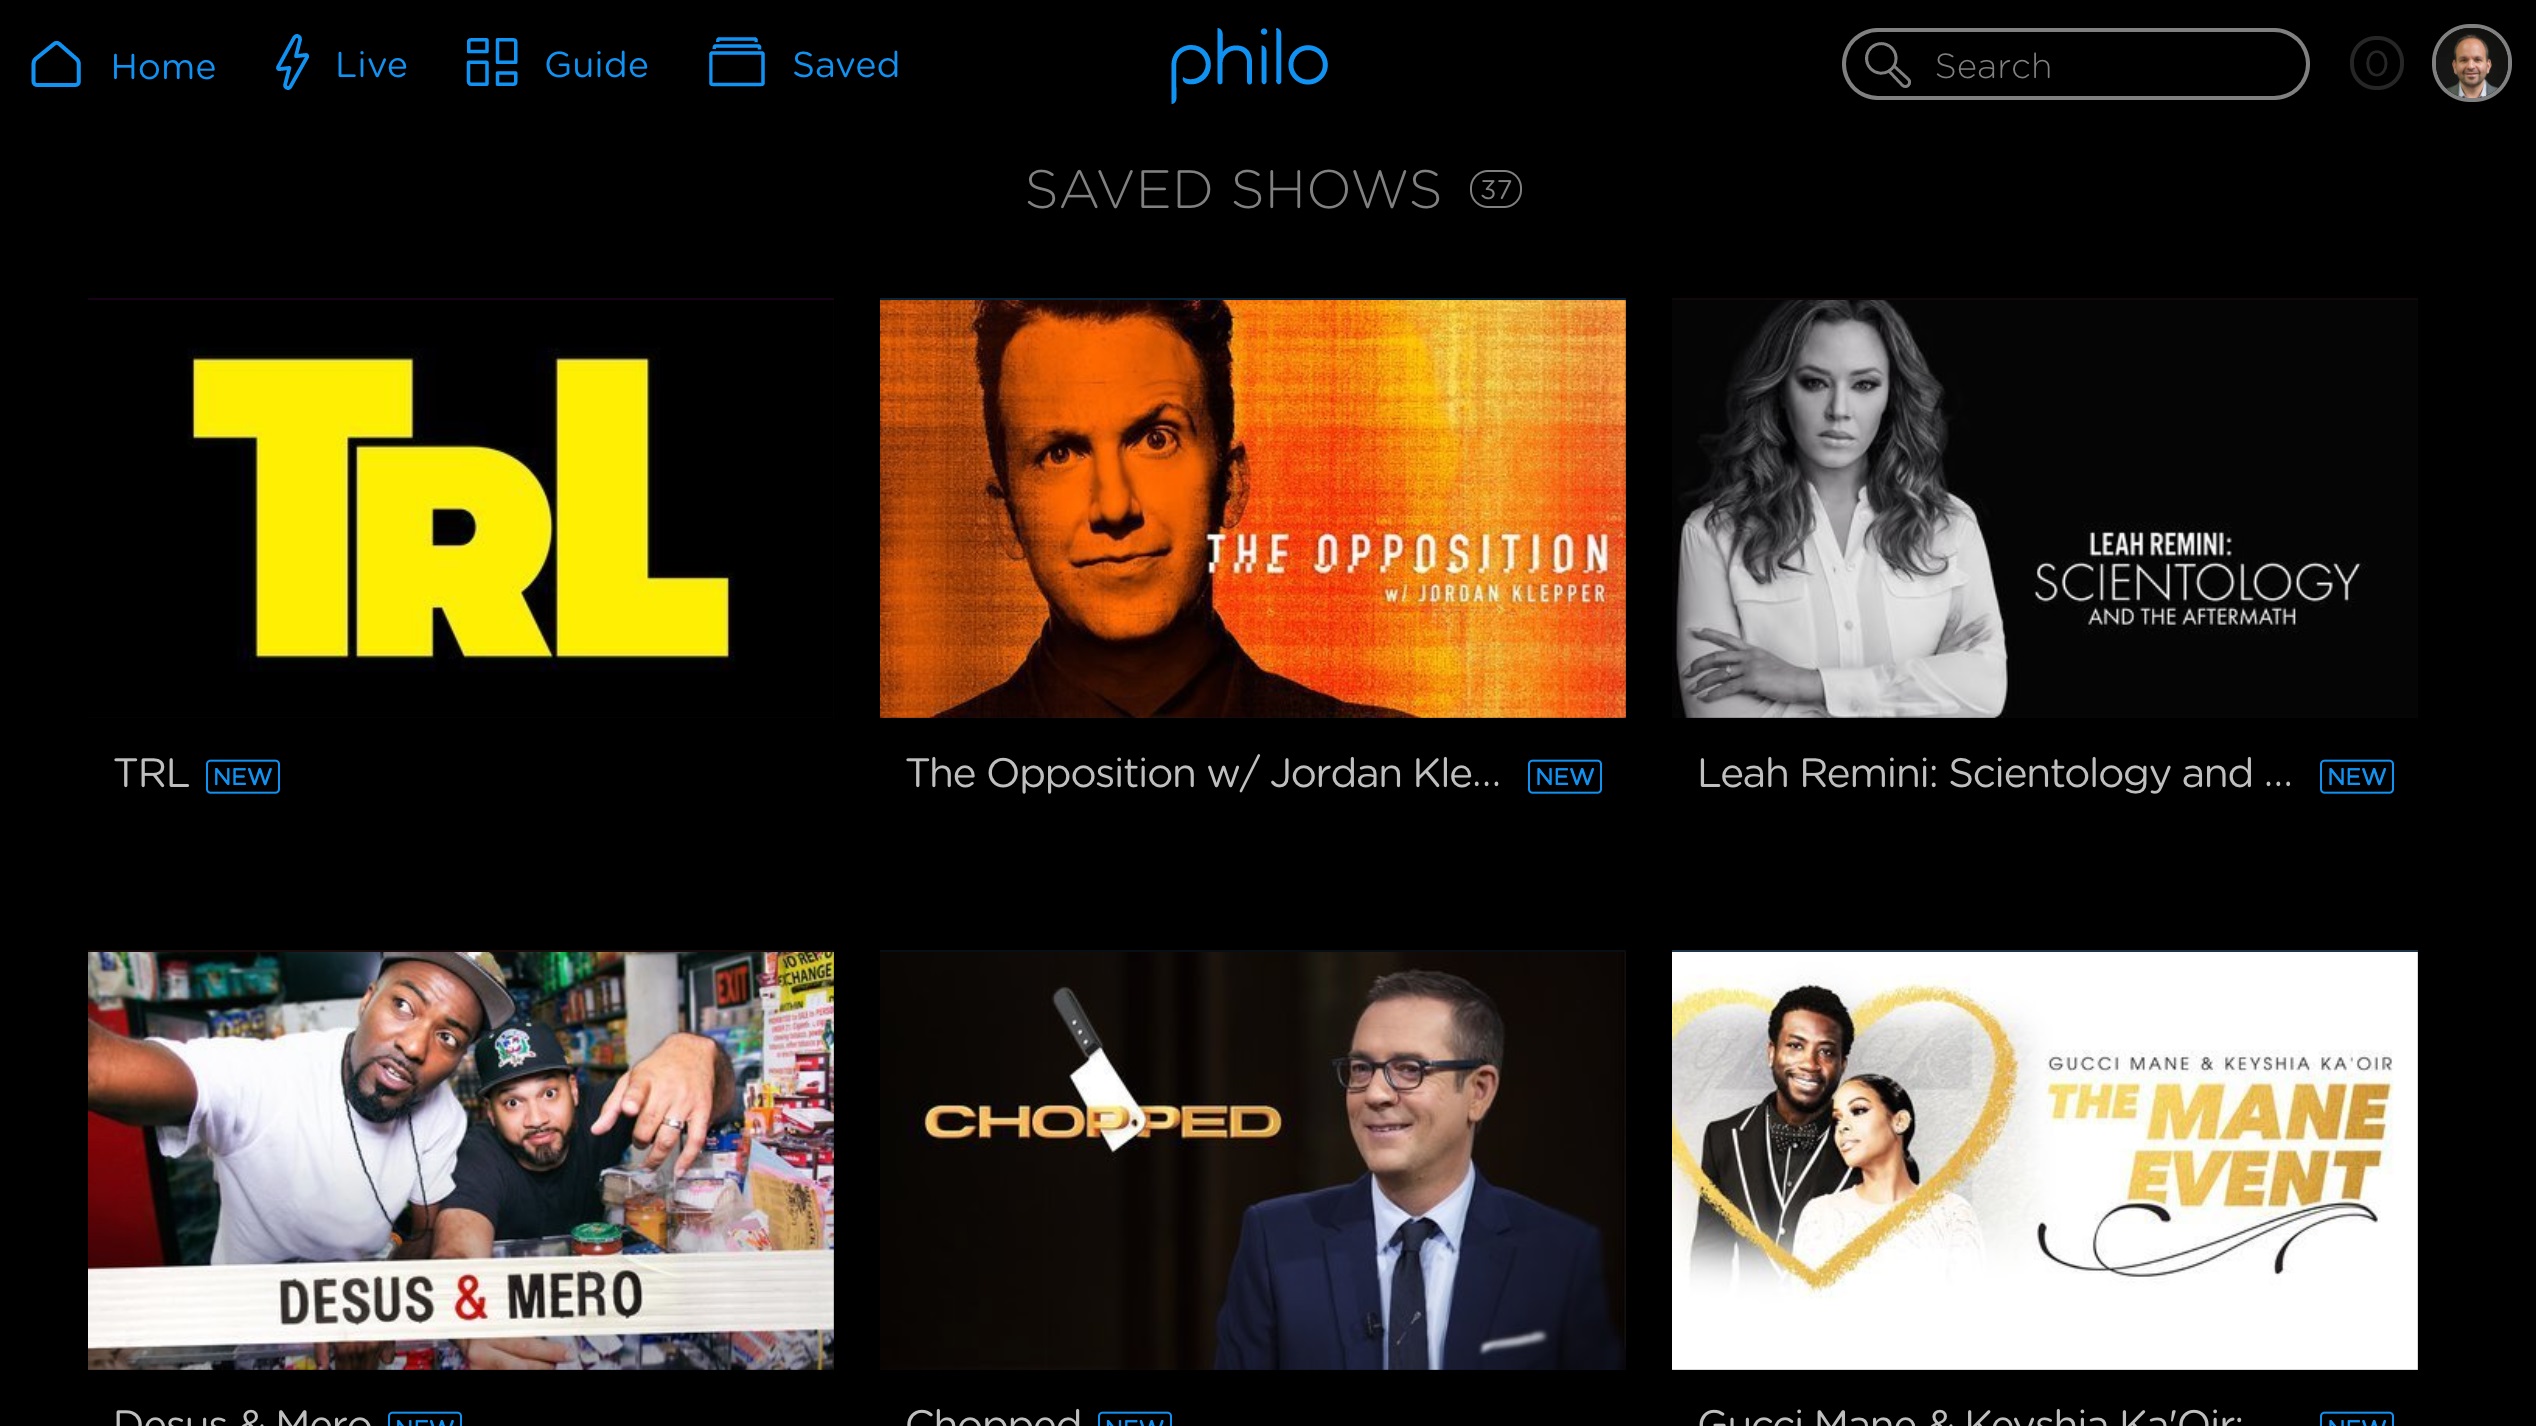 Philo Everything you need to know about the live TV streaming service